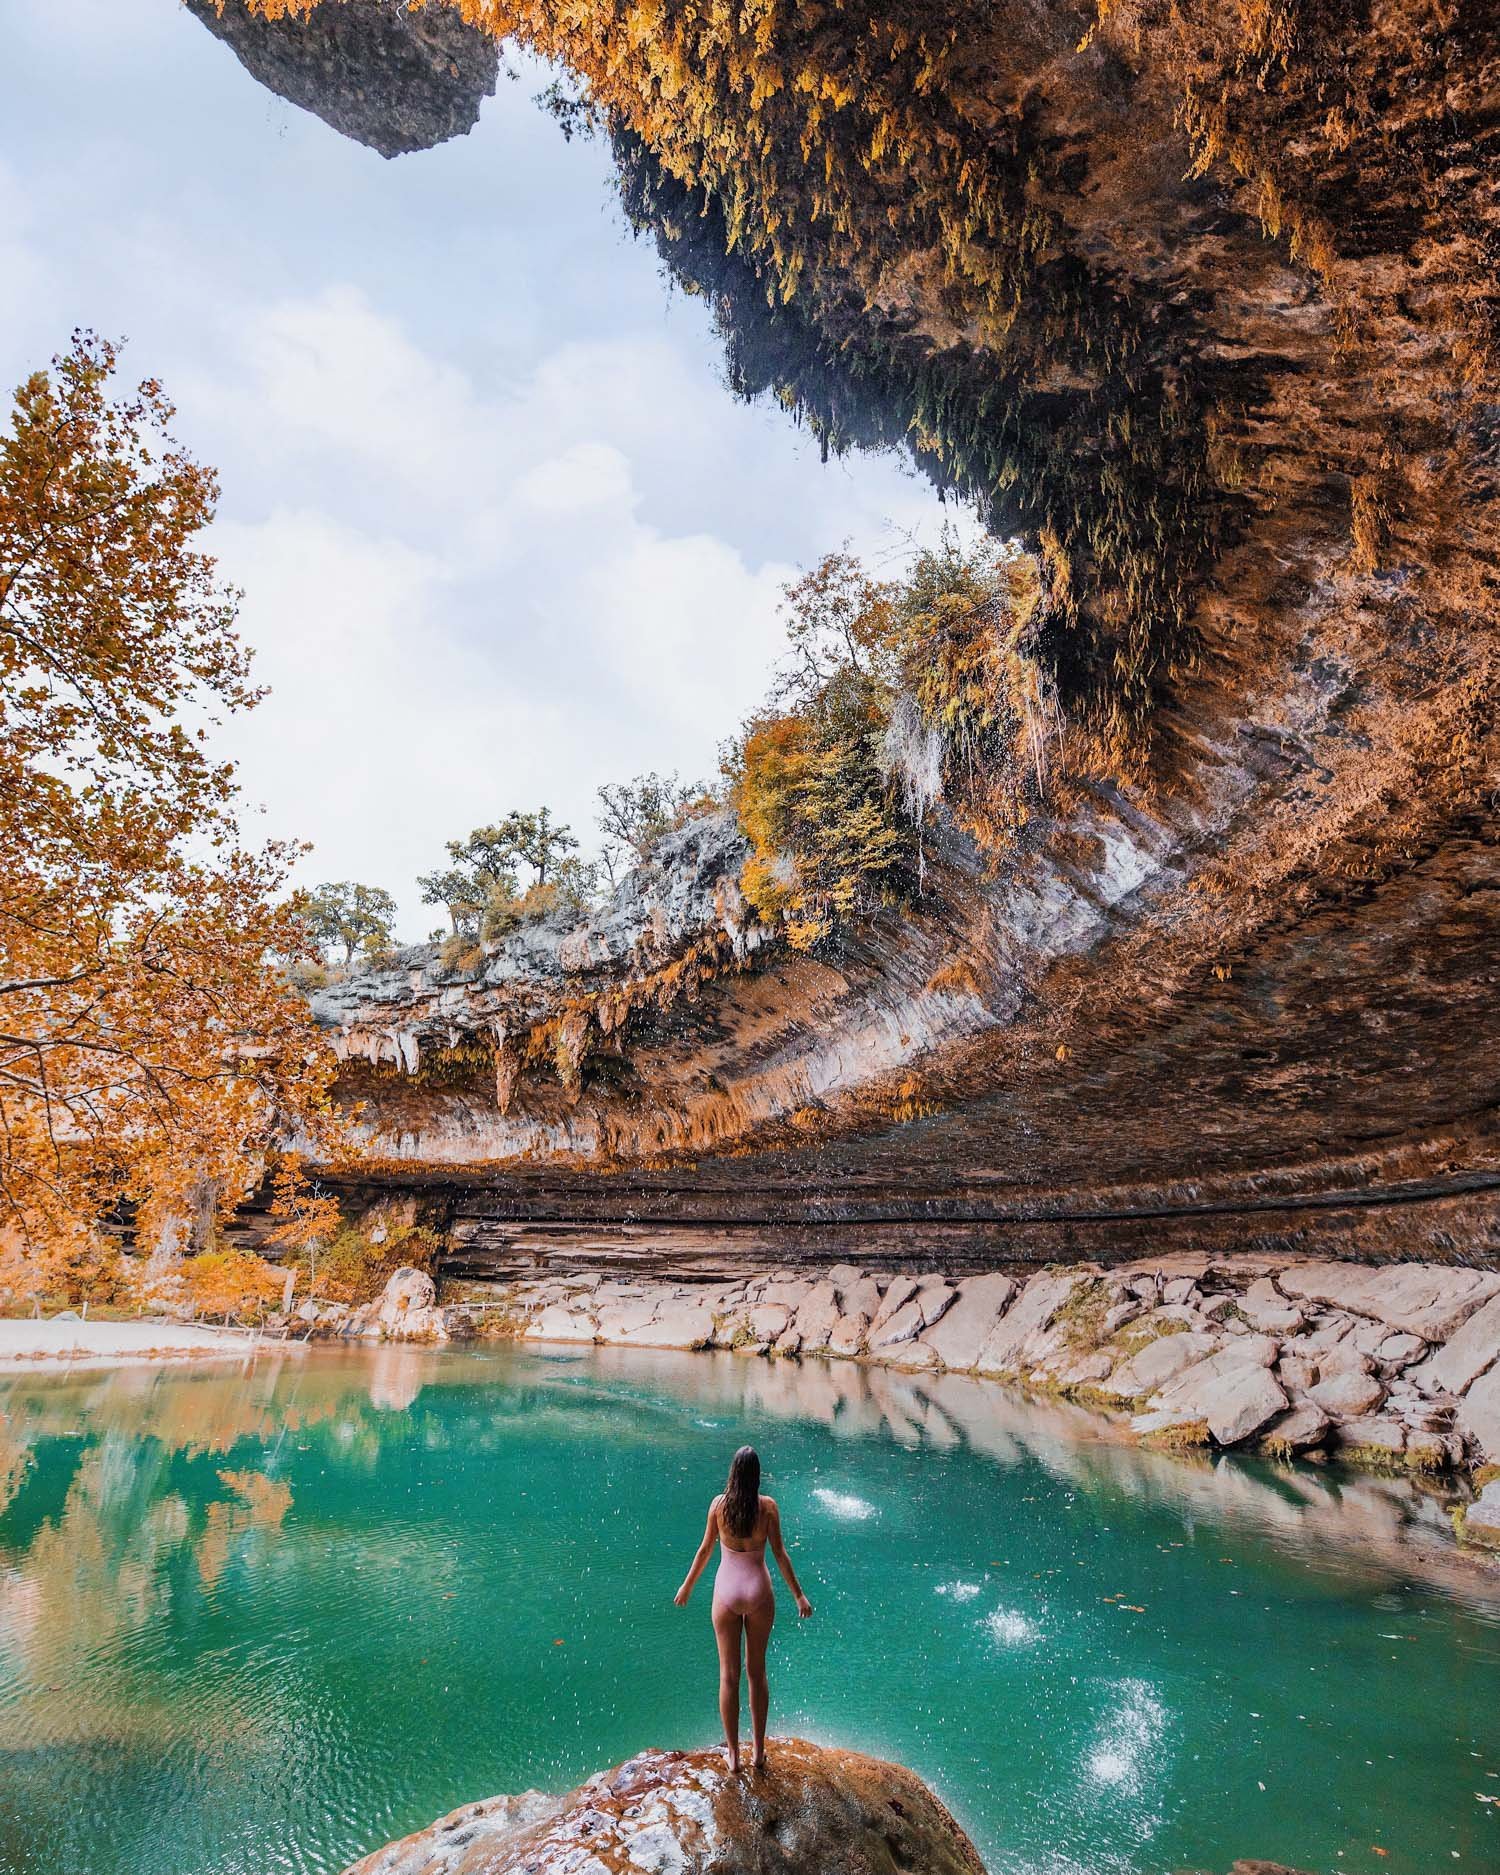 How to Plan a Visit to Hamilton Pool in Dripping Springs, Texas // day trips from Austin and San Antonio; Texas swimming holes; prettiest places in Texas; Texas hiking and outdoors